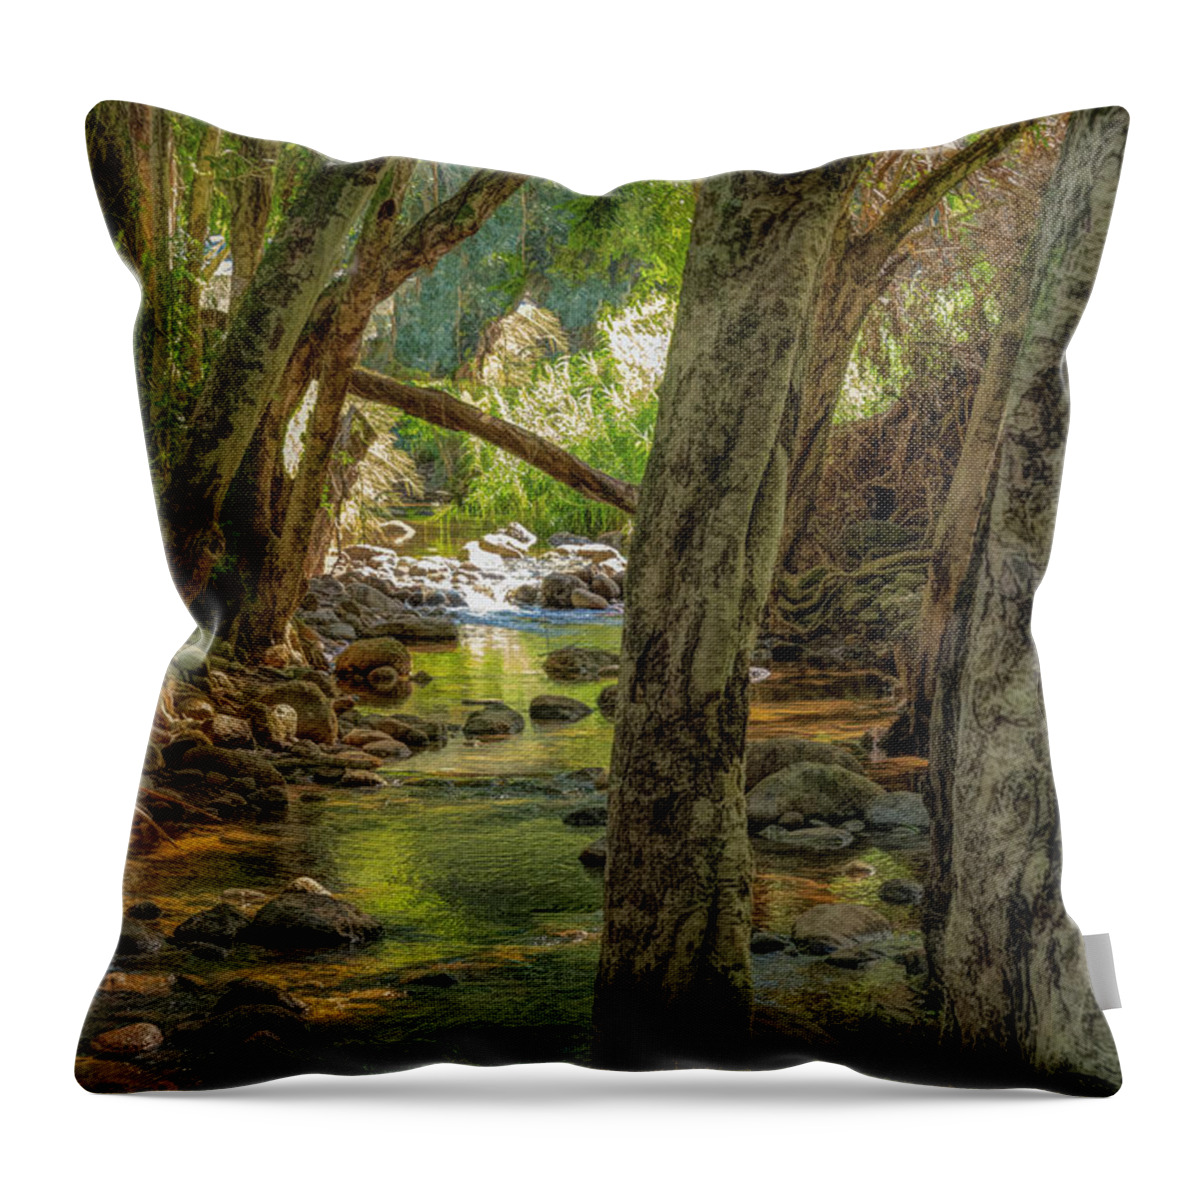 Hawaii Throw Pillow featuring the photograph Forever Flowing Rainwater by G Lamar Yancy